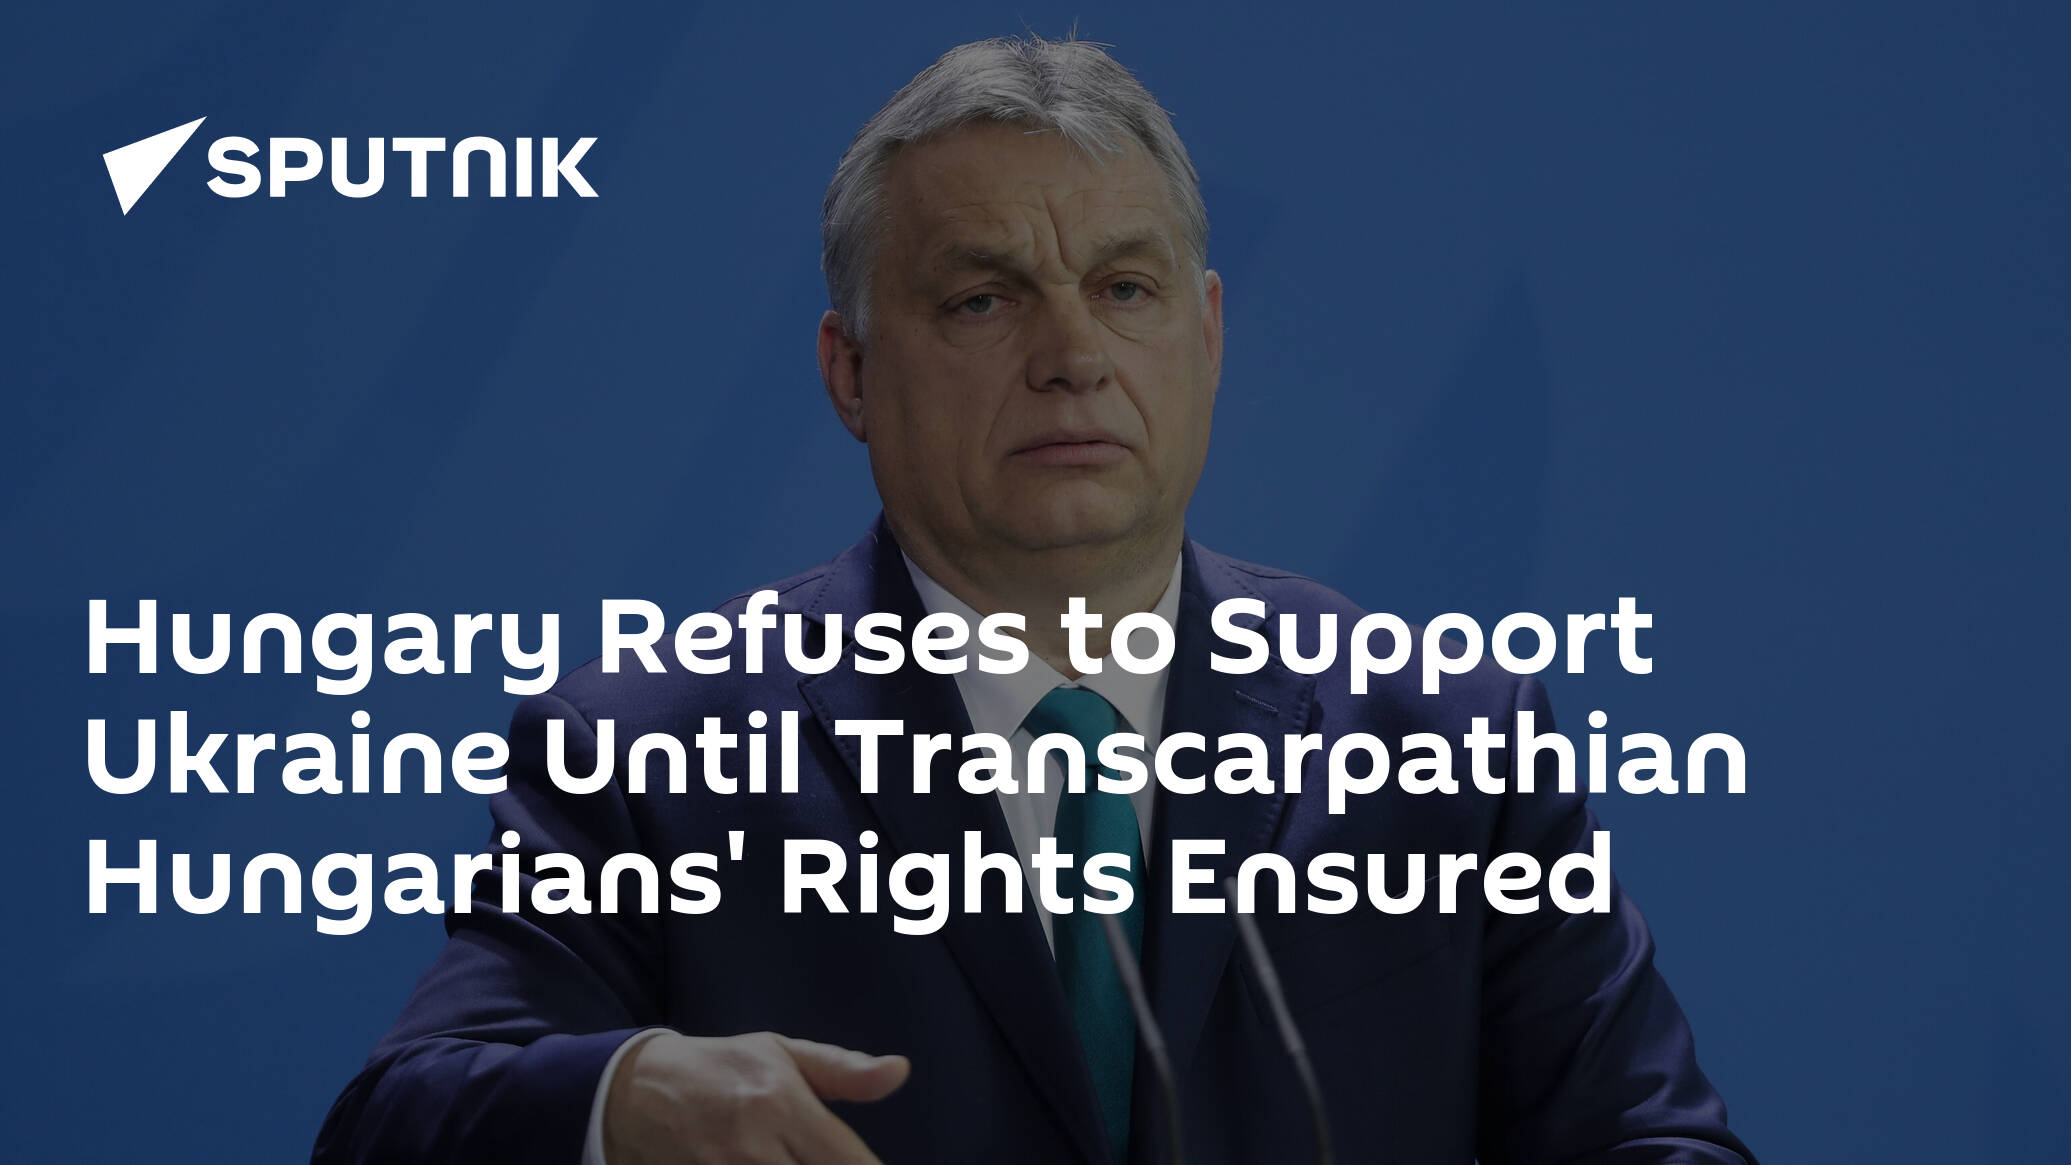 Hungary Refuses to Support Ukraine Until Transcarpathian Hungarians' Rights Ensured